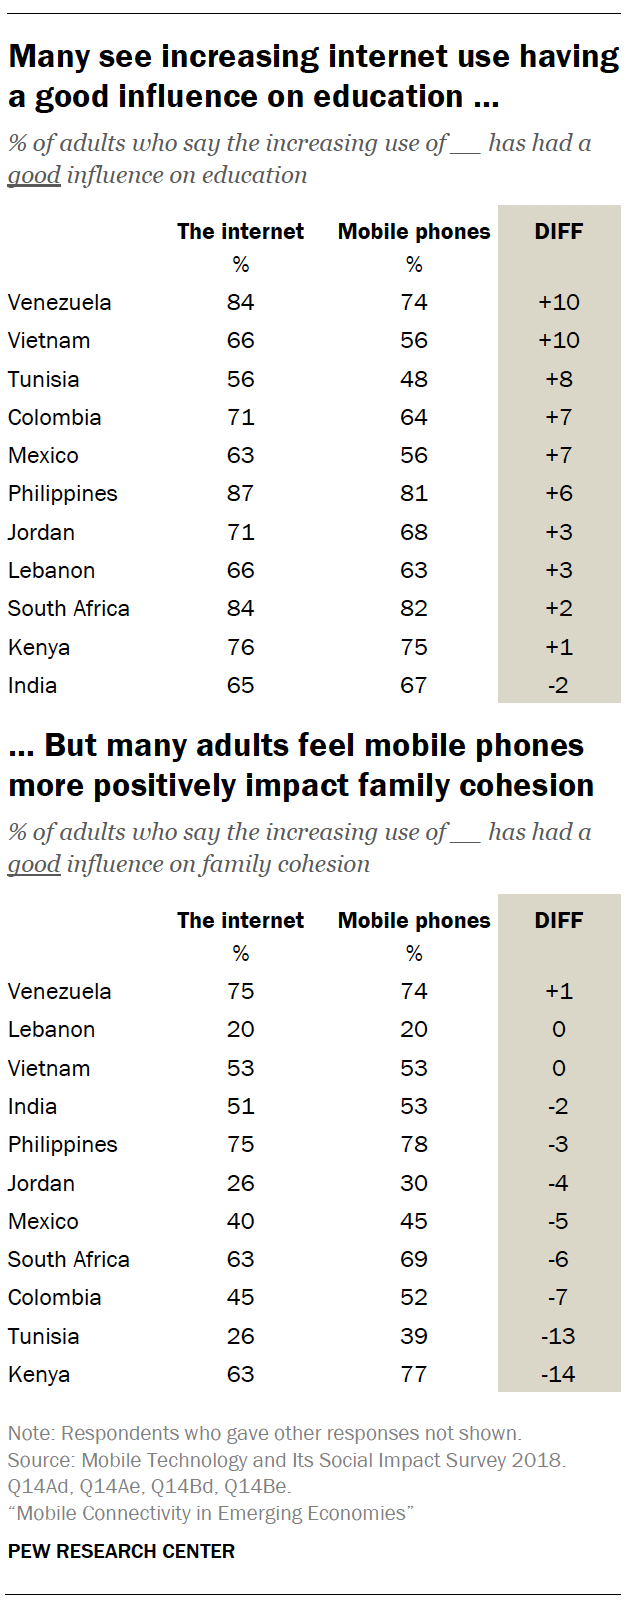 Many see increasing internet use having a good influence on education … But many adults feel mobile phones more positively impact family cohesion